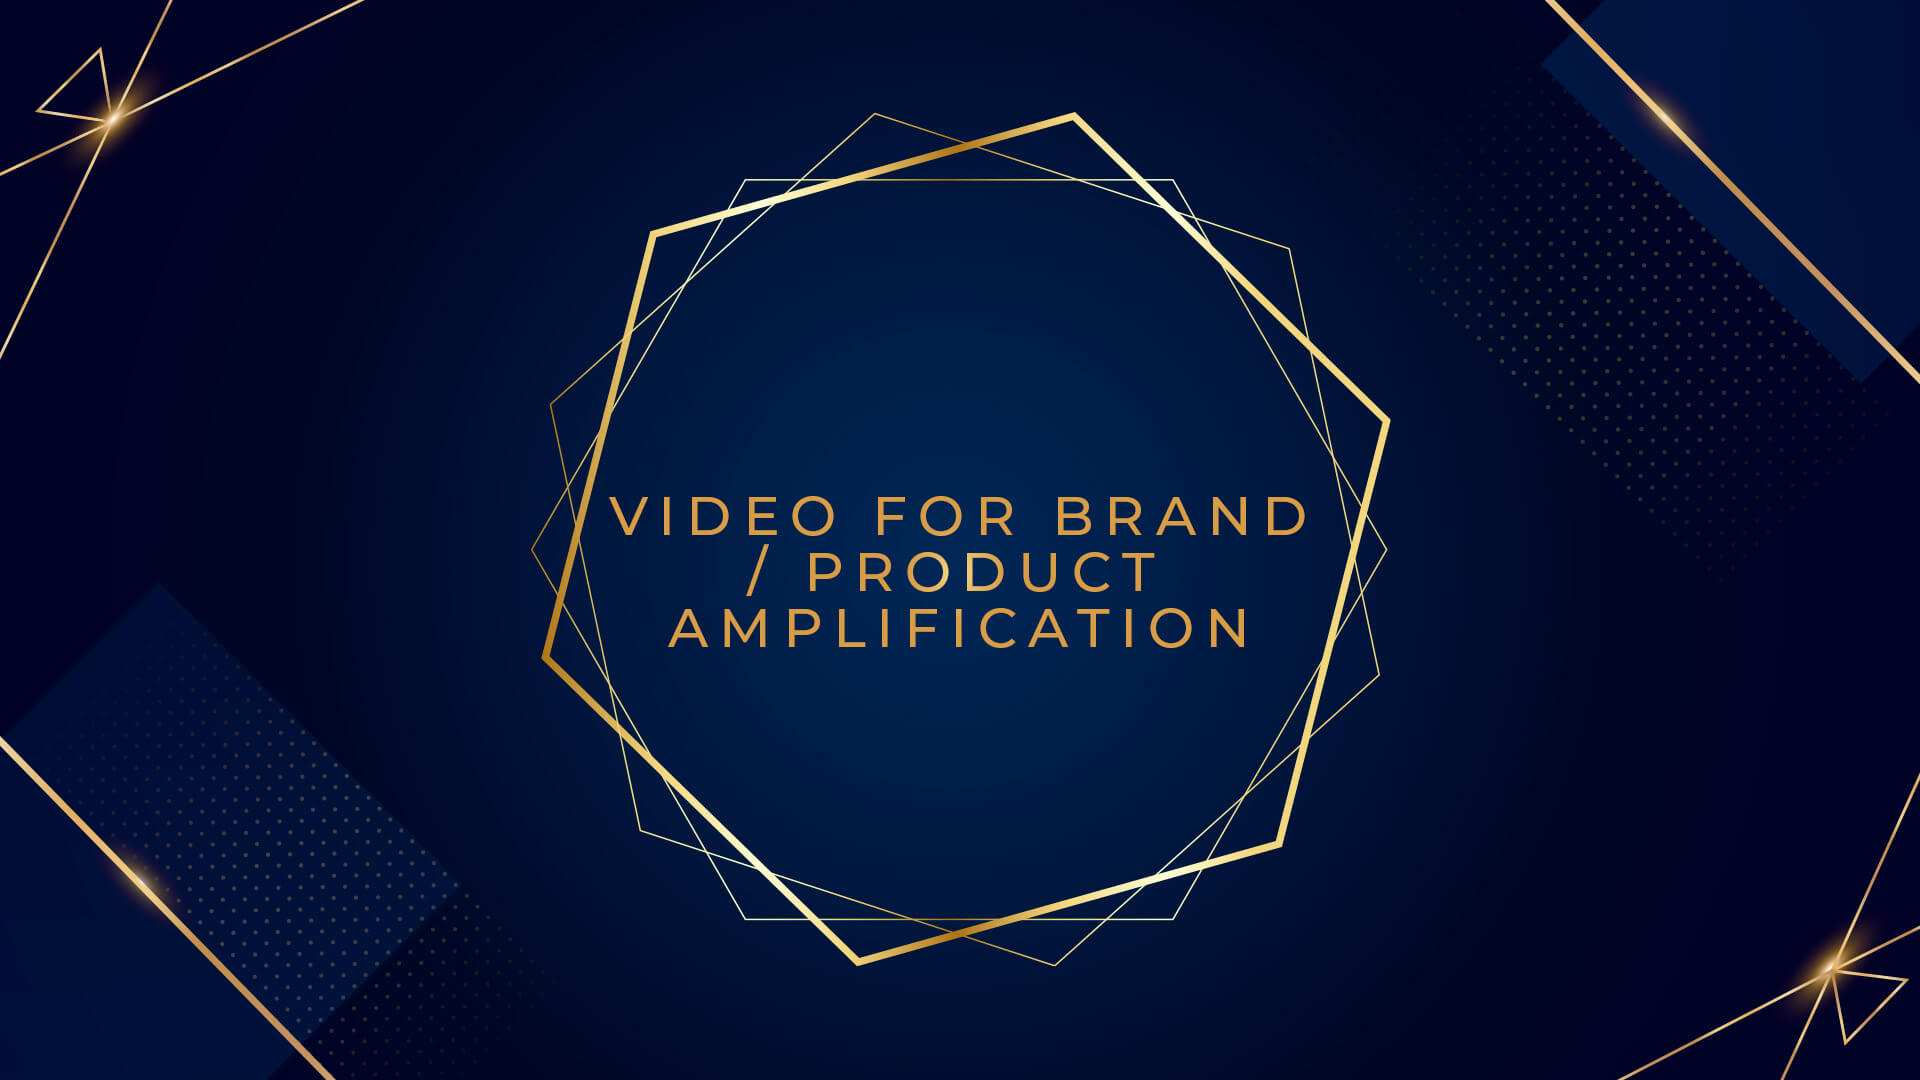 Video for Brand / Product Amplification